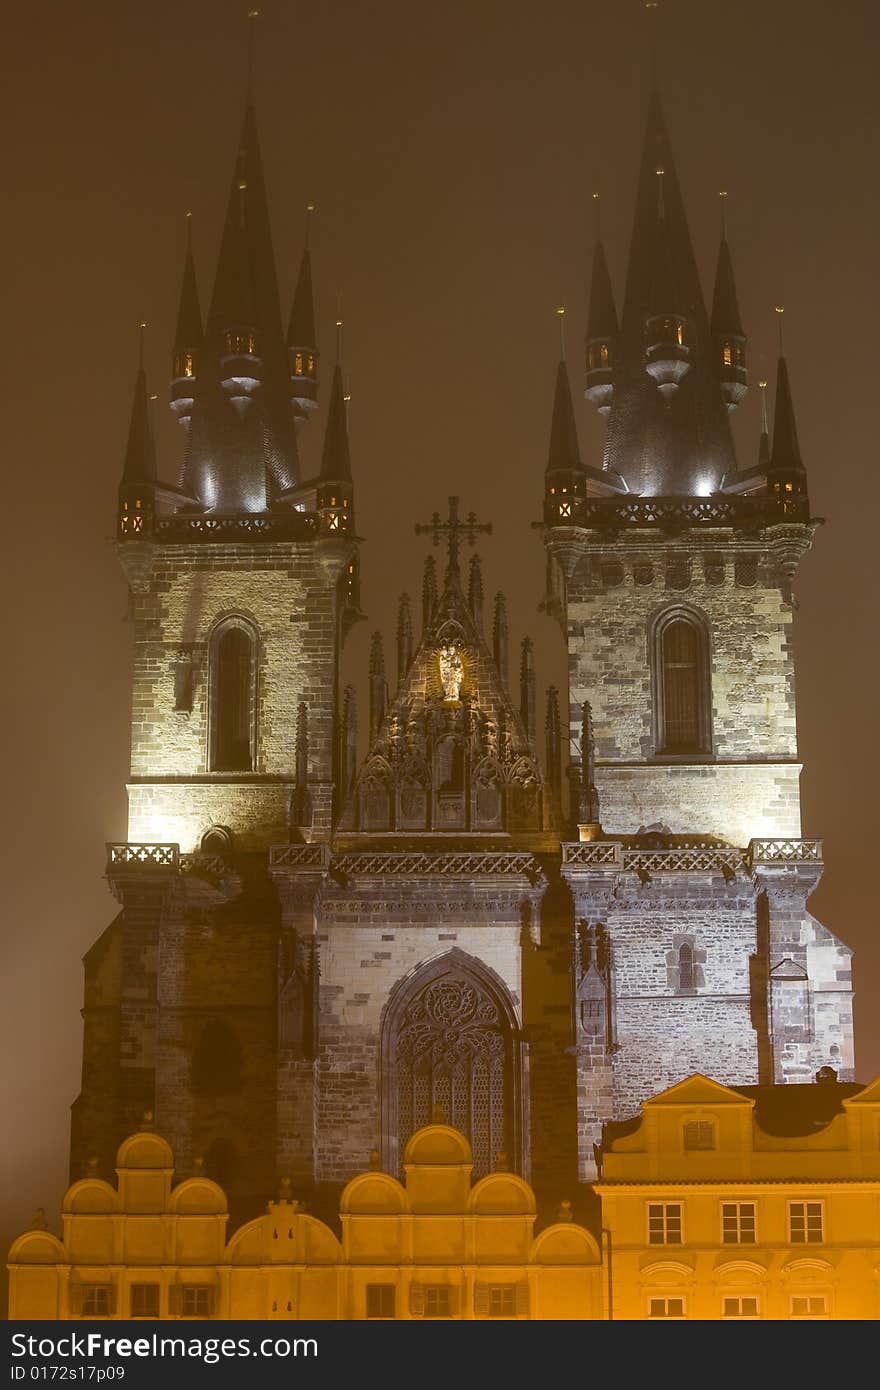 St Teyn cathedral on Old Town Square in Prague surrounded by fog. St Teyn cathedral on Old Town Square in Prague surrounded by fog.